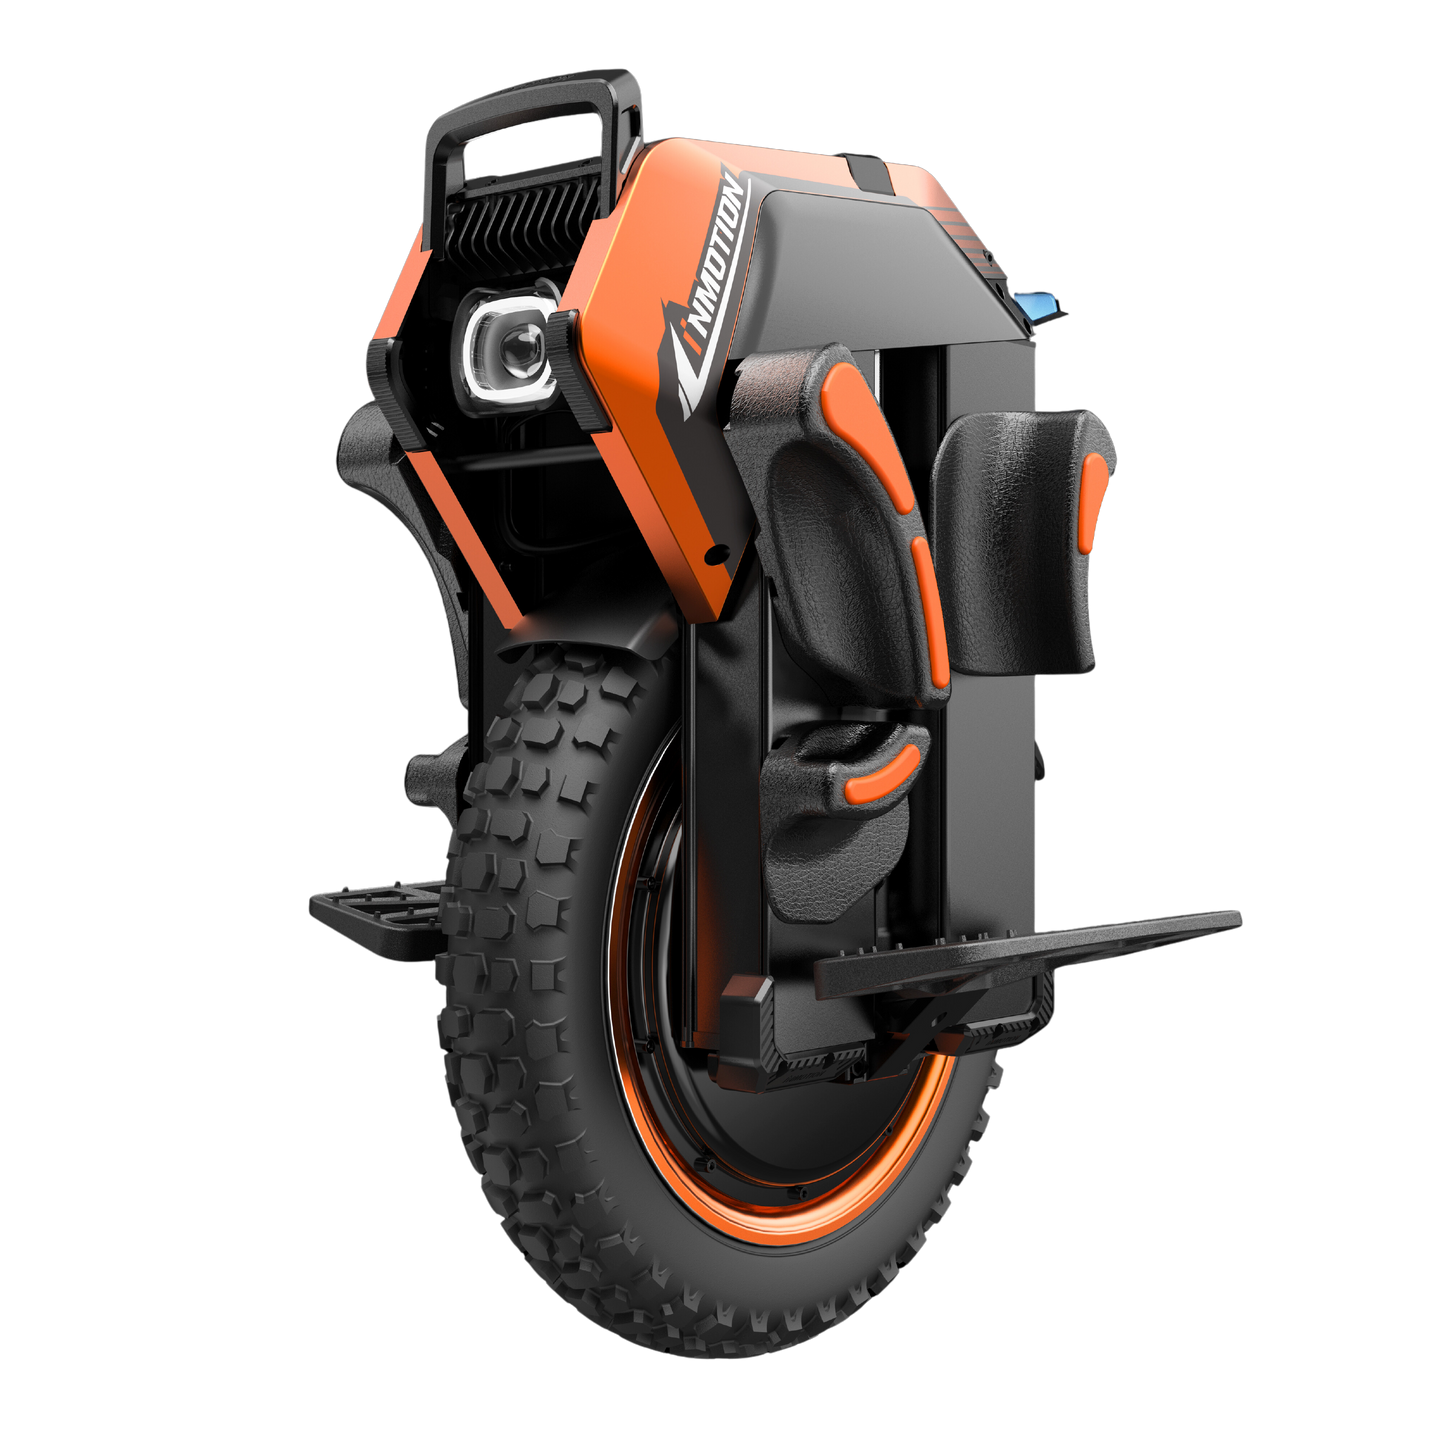 Inmotion Adventure (V14) Electric Unicycle